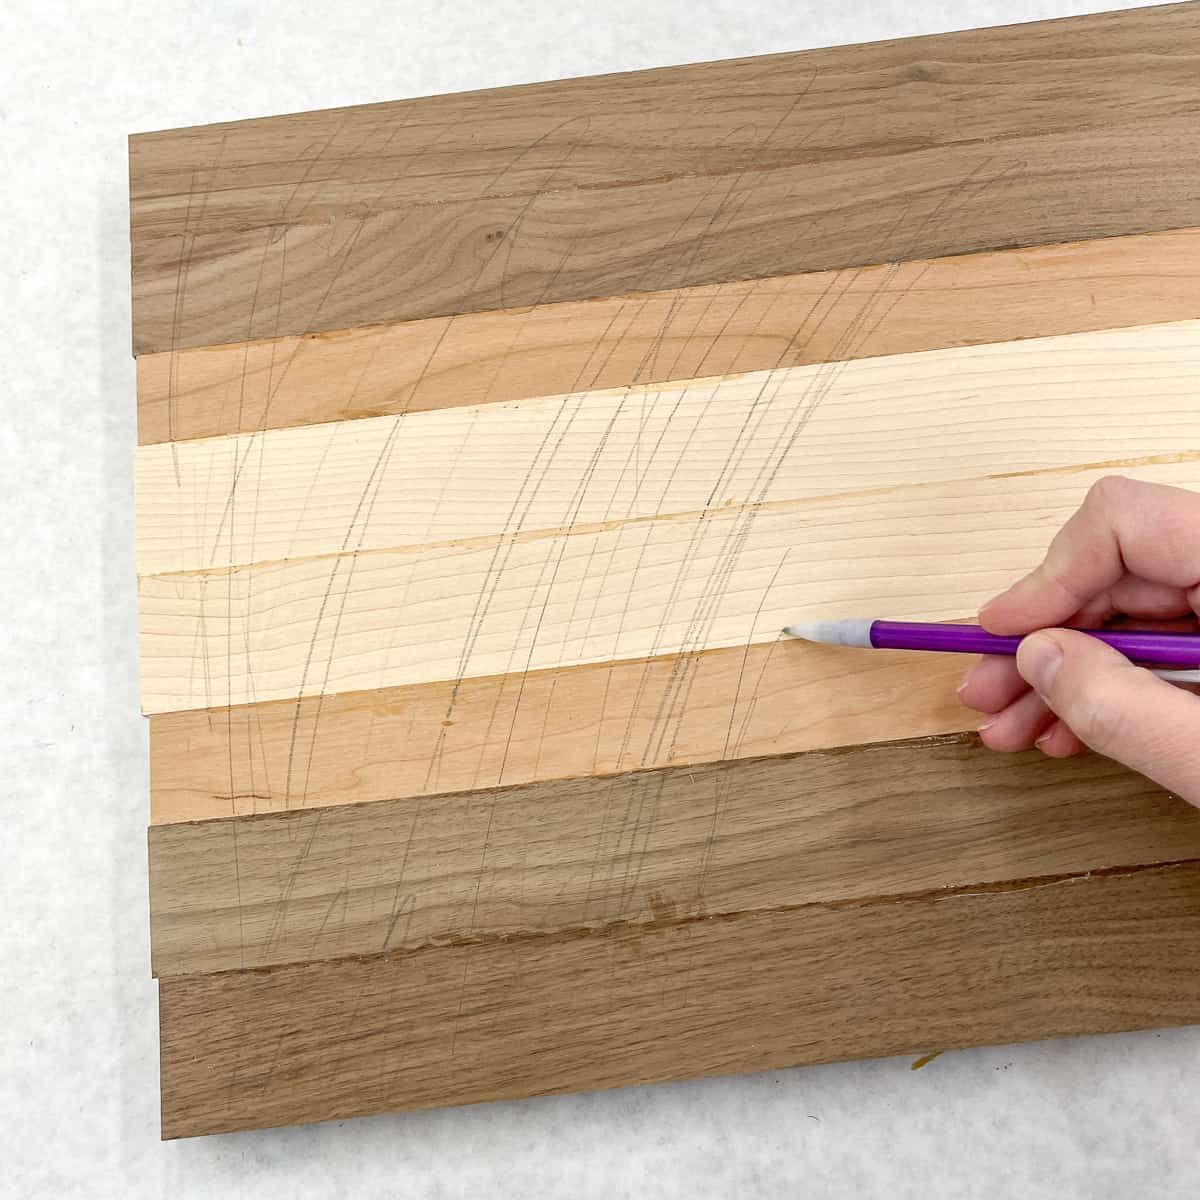 scribbling pencil lines over cutting board surface to aid with sanding